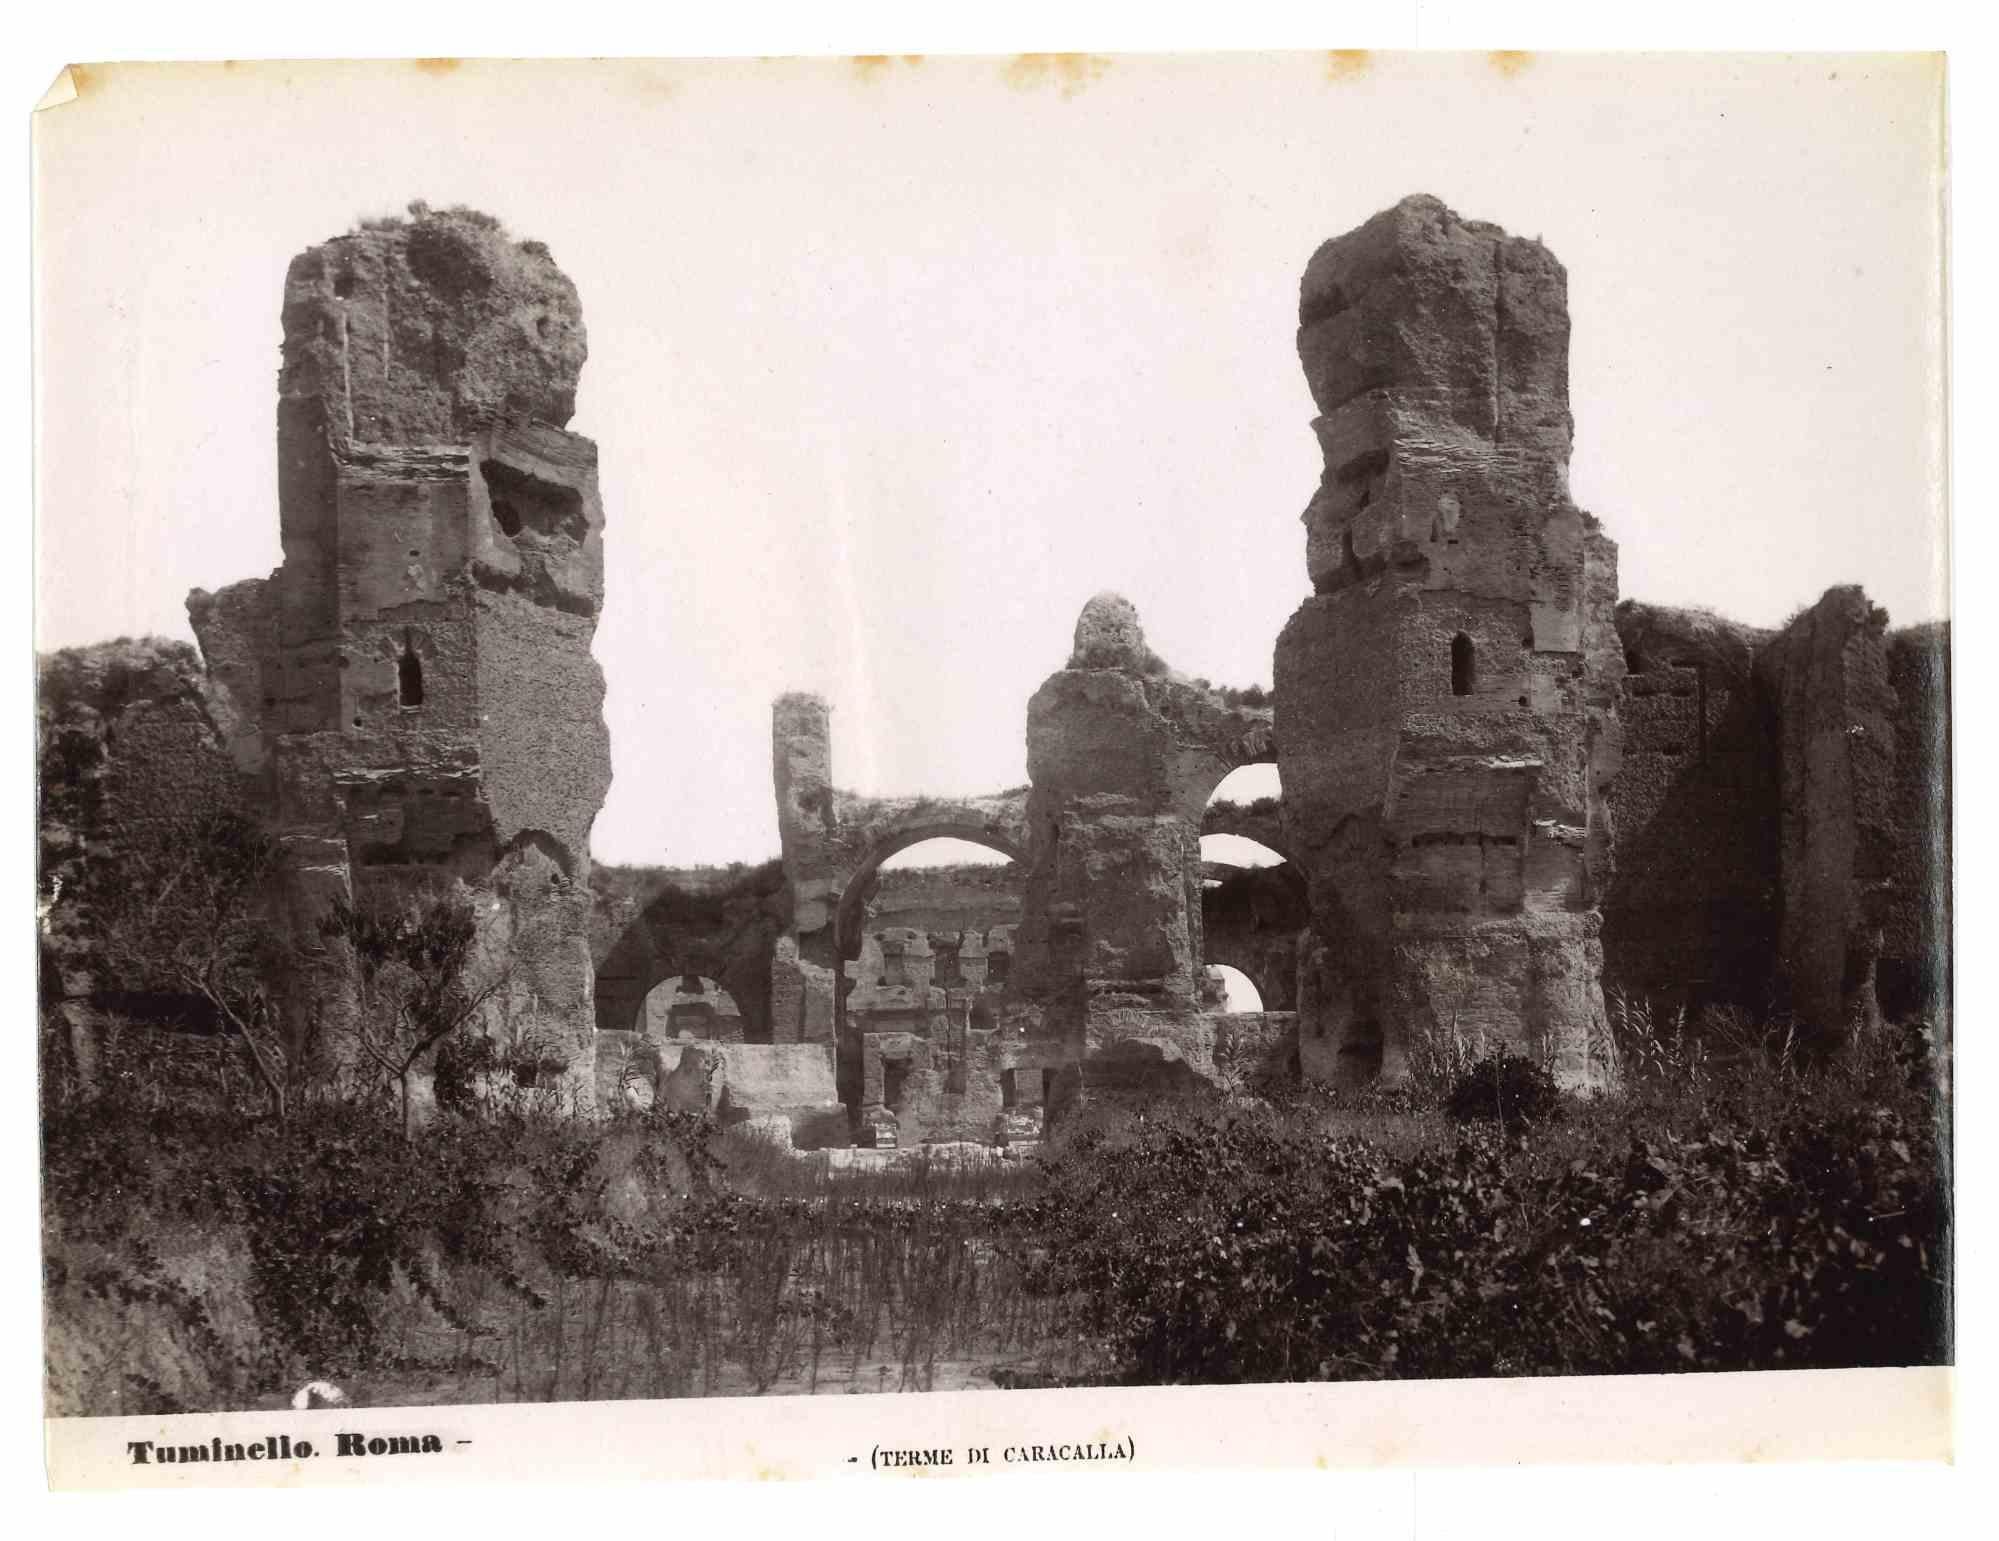 Baths of Caracalla is a vintage photograph realized by Ludovico Tuminello in the early 20th Century.

Titled on the lower.

Good conditions except for some foxing.